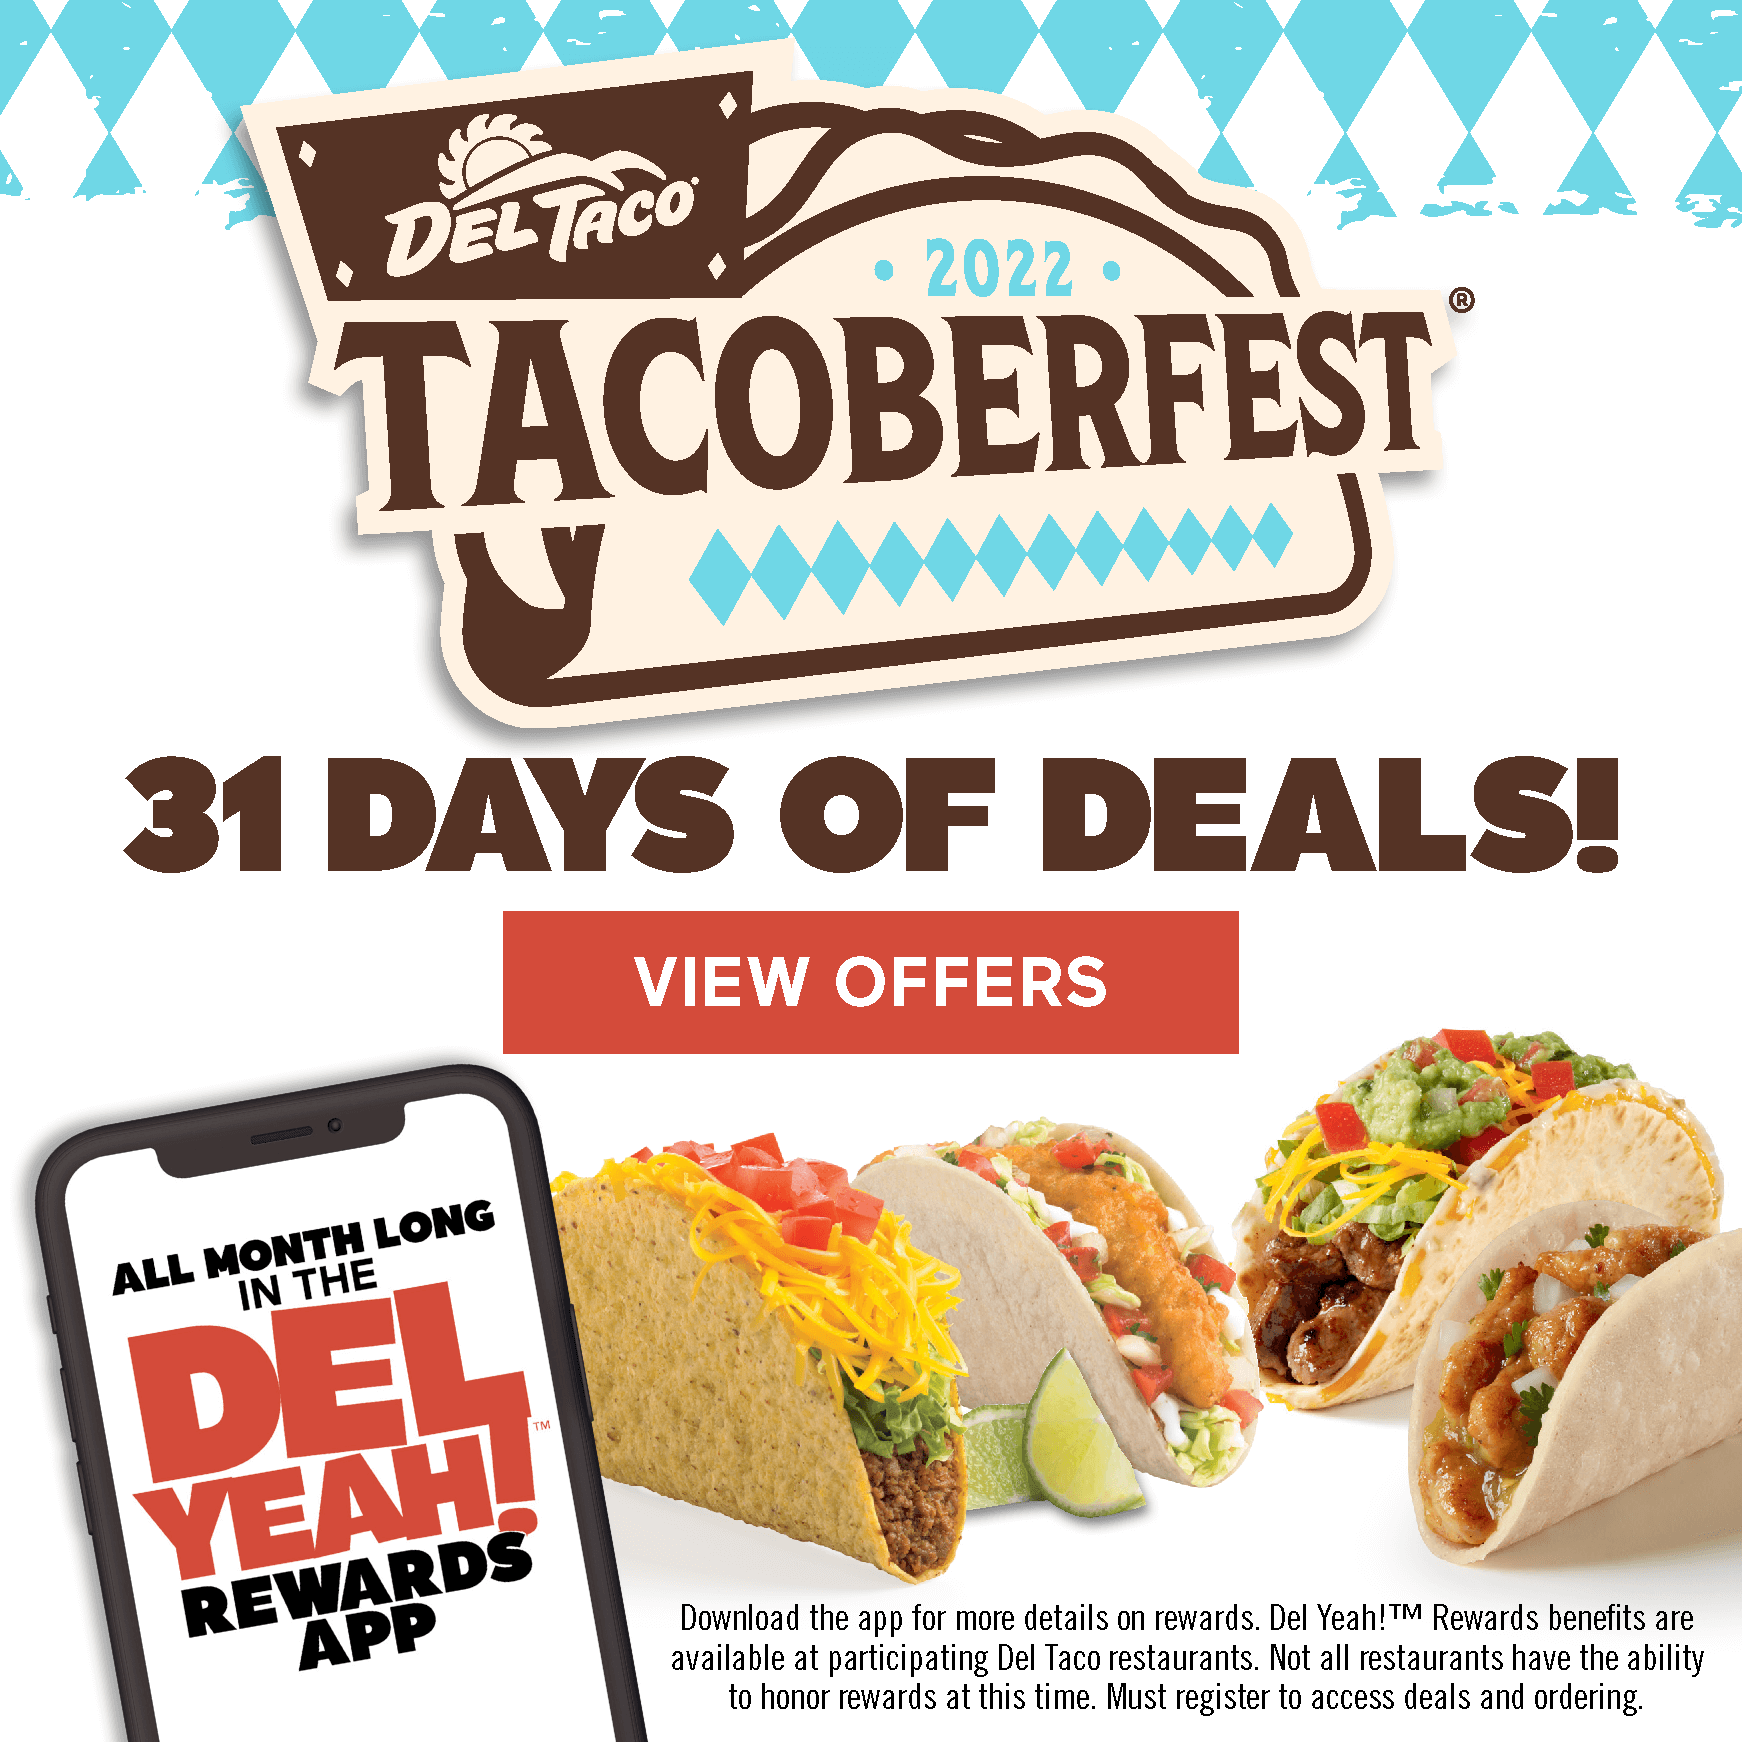 2022 Tacoberfest 31 Days of Deals. Click to view offers